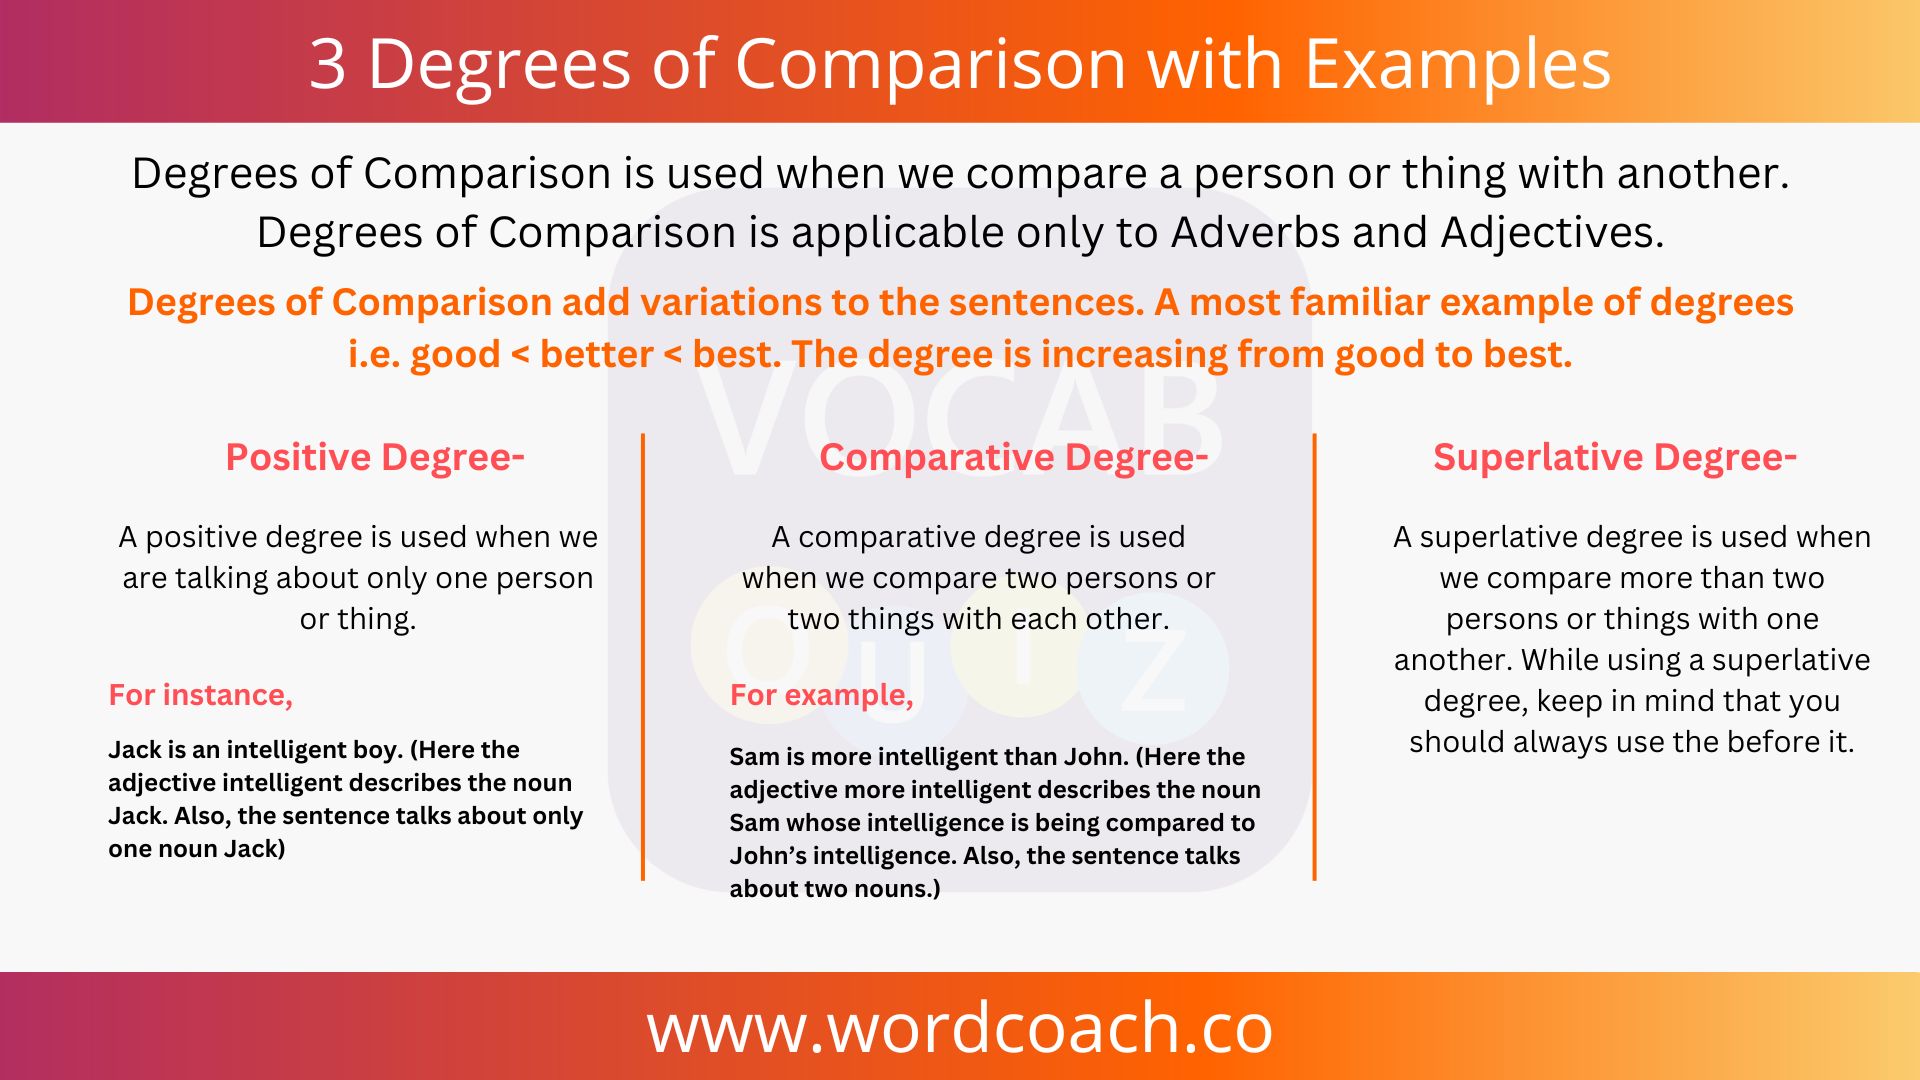 3 Degrees of Comparison with Examples - wordcoach.co